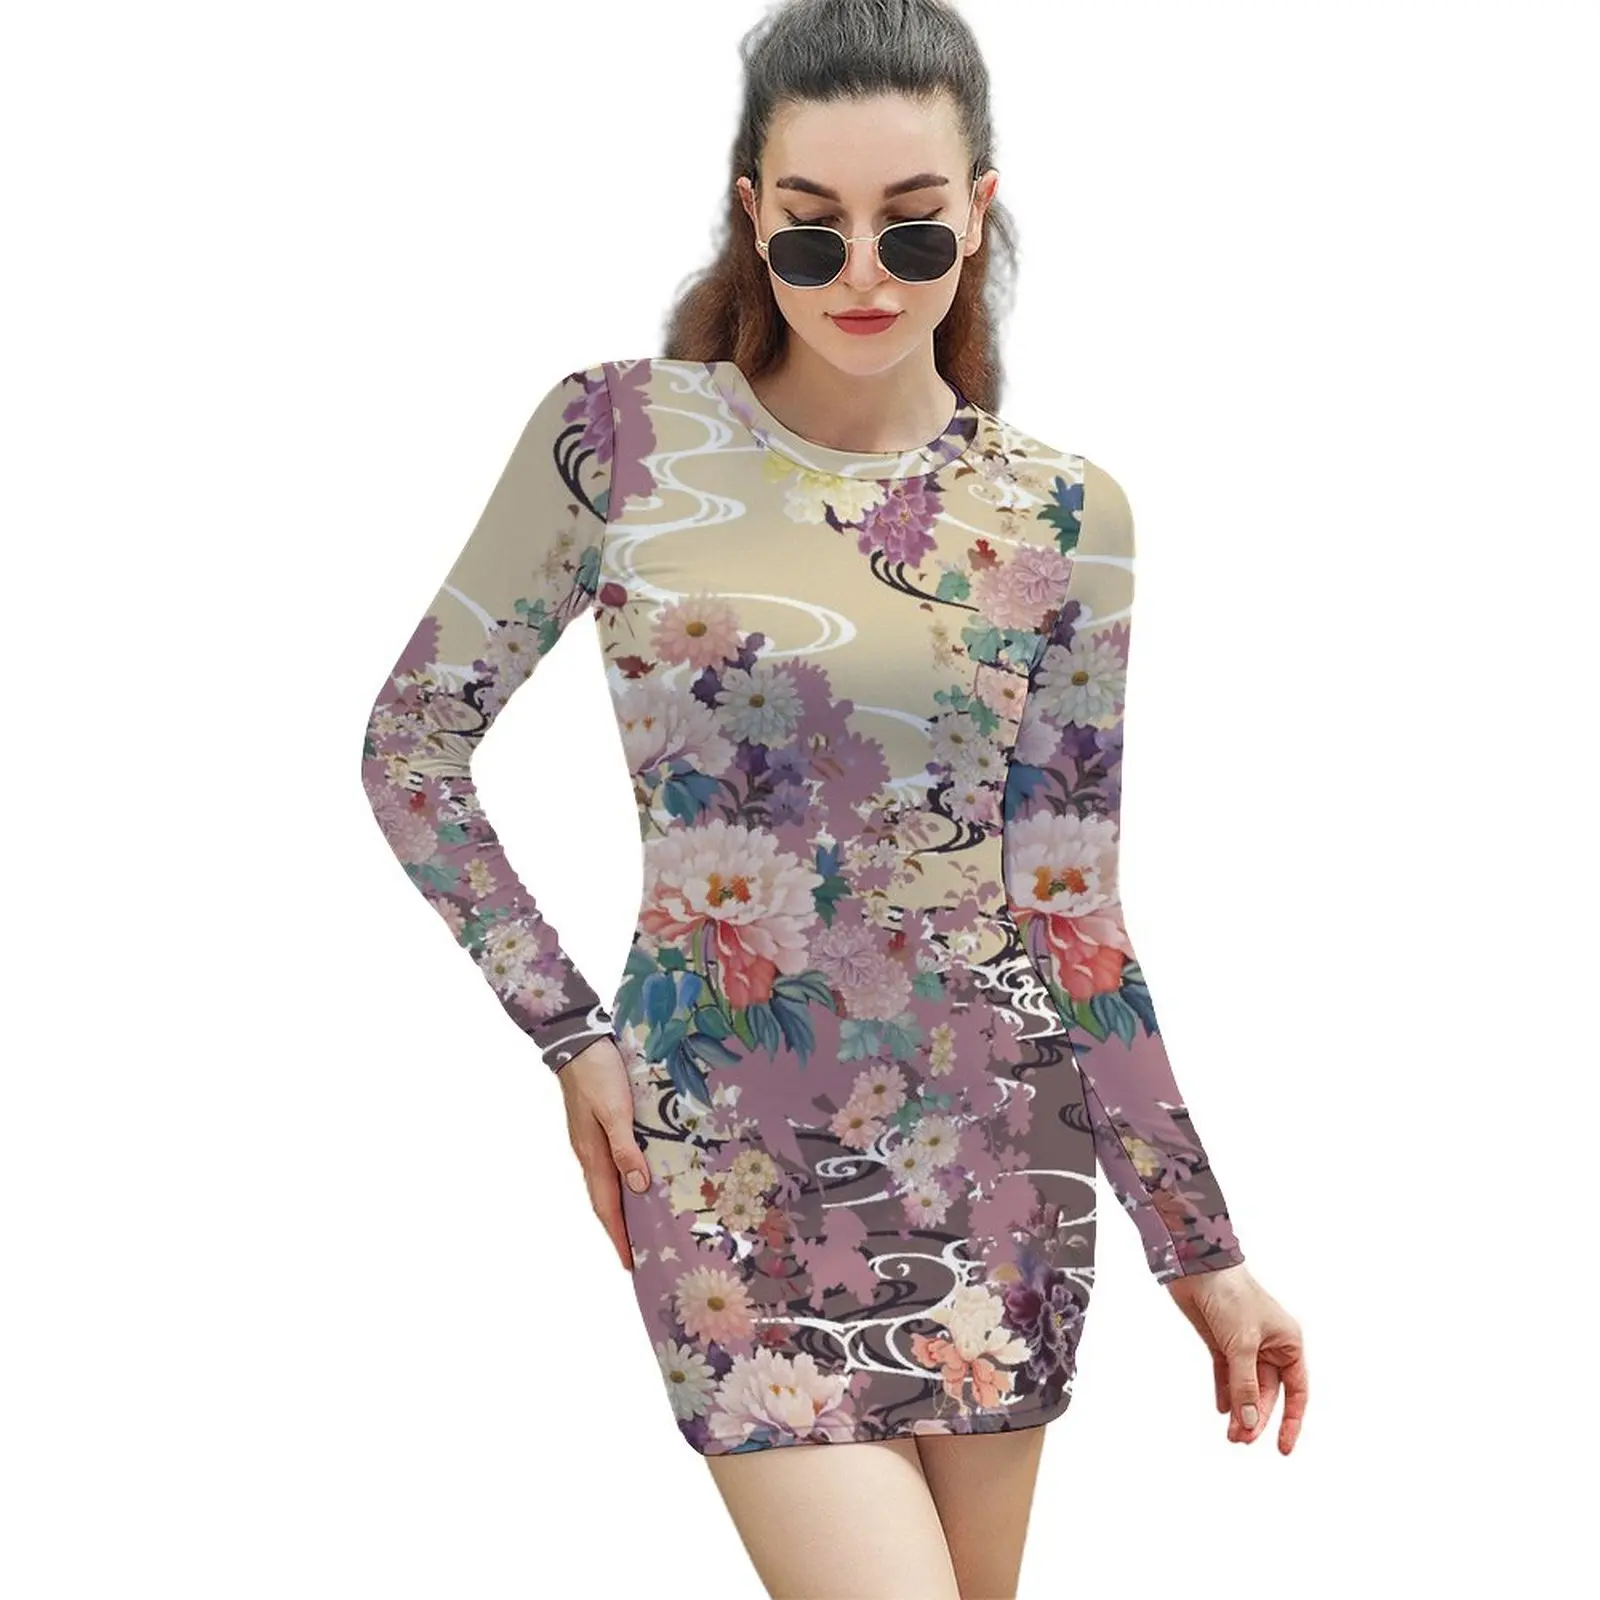 

Sexy Woman's Gown The Dress Flowers Long-sleeved Sheath Dress Novelty Cocktails Humor Graphic